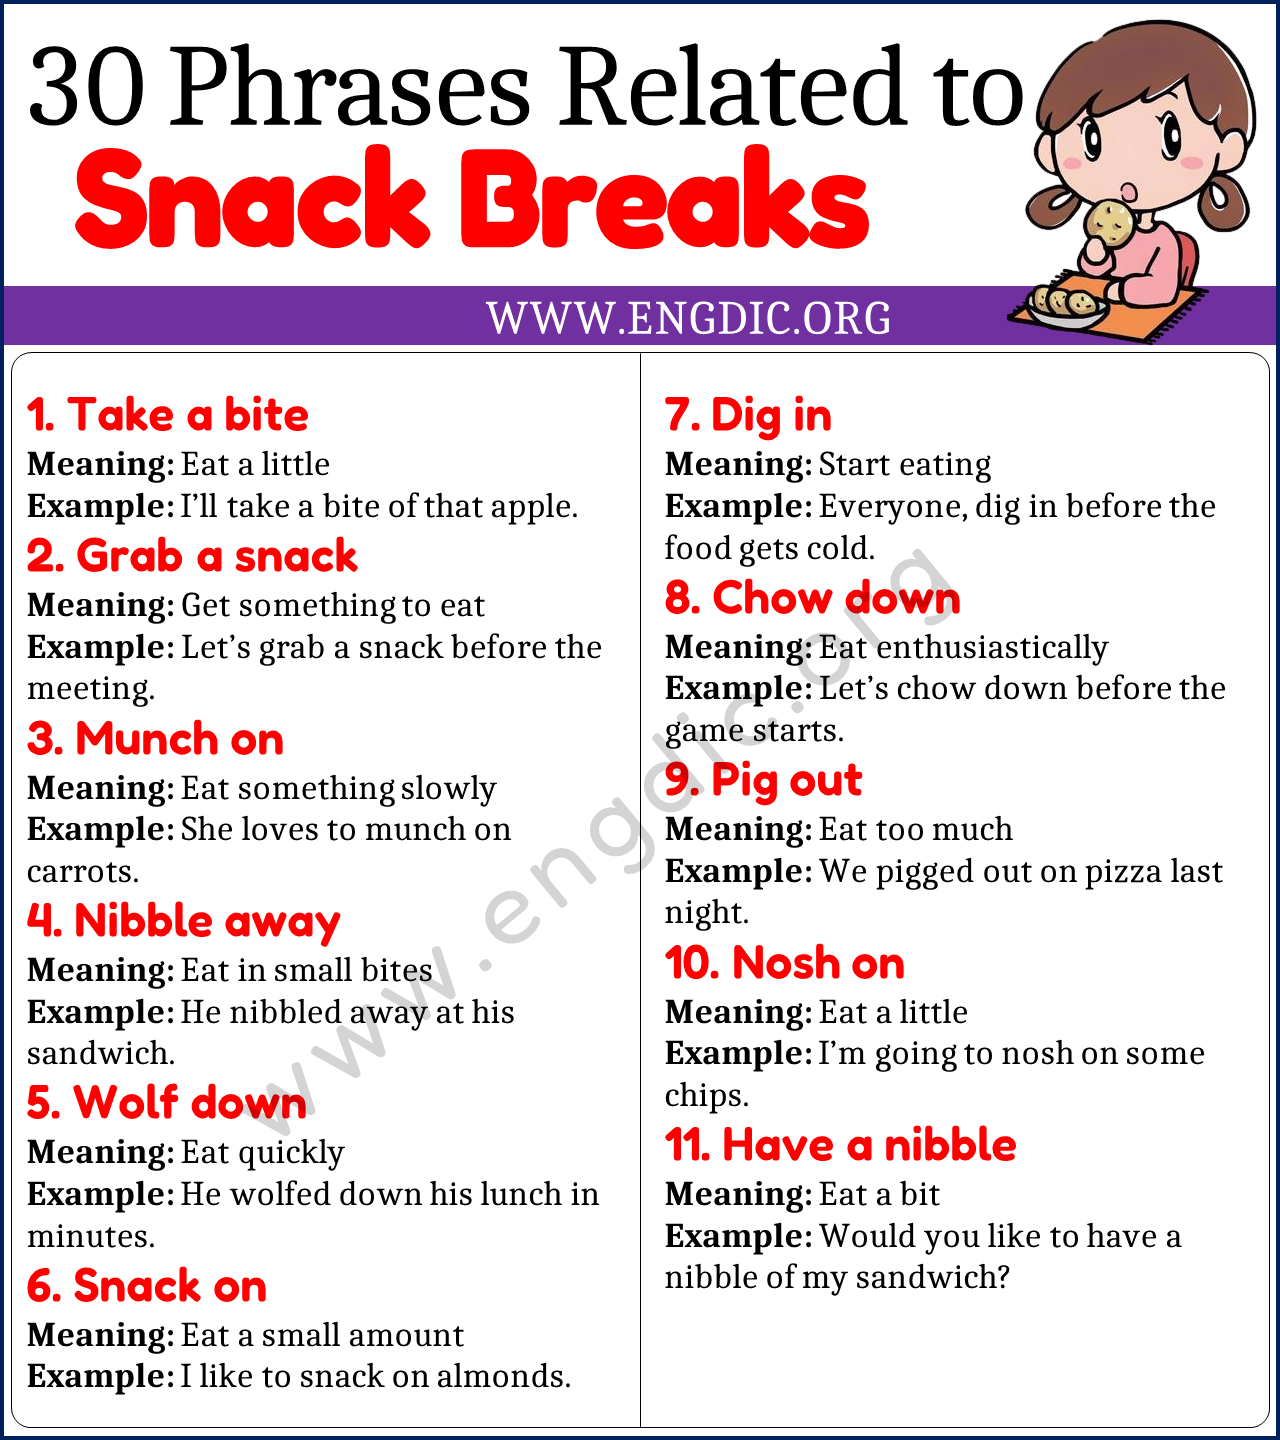 Phrases Related to Snack Breaks